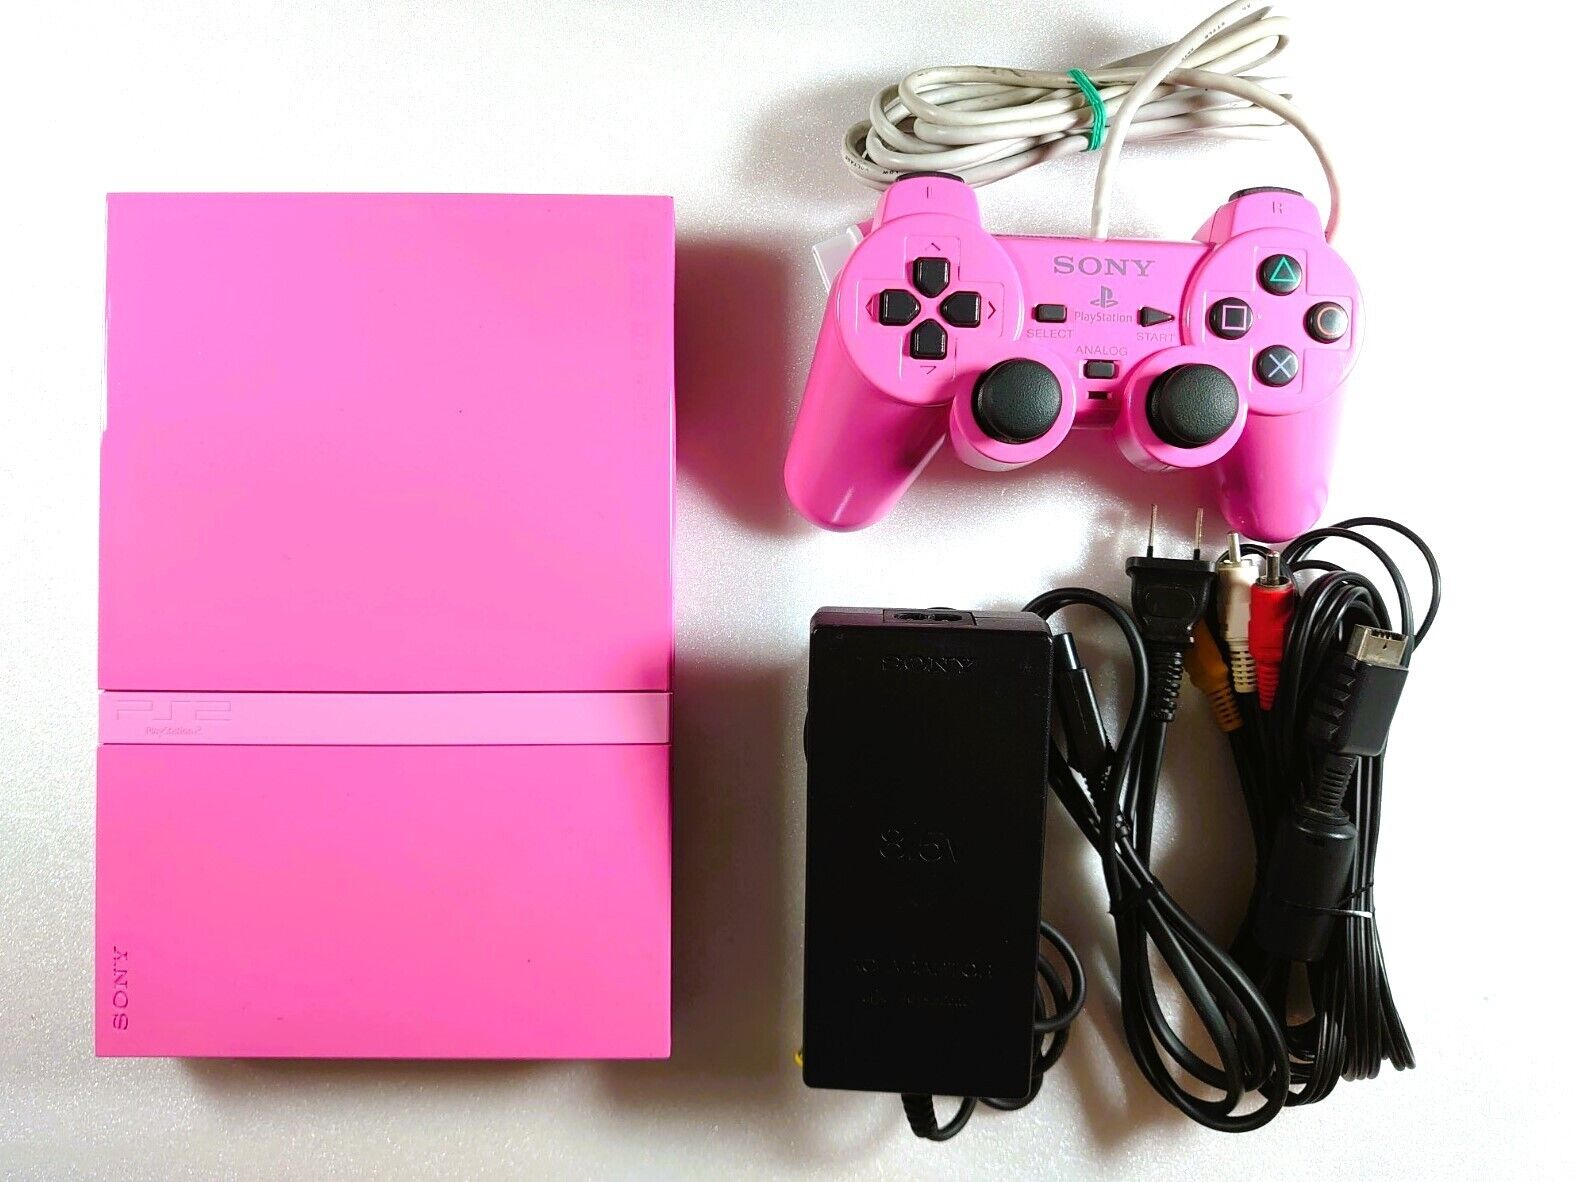 SONY Playstation 2 PS2 Slim Console Pink SCPH-77000 NTSC-J Tested